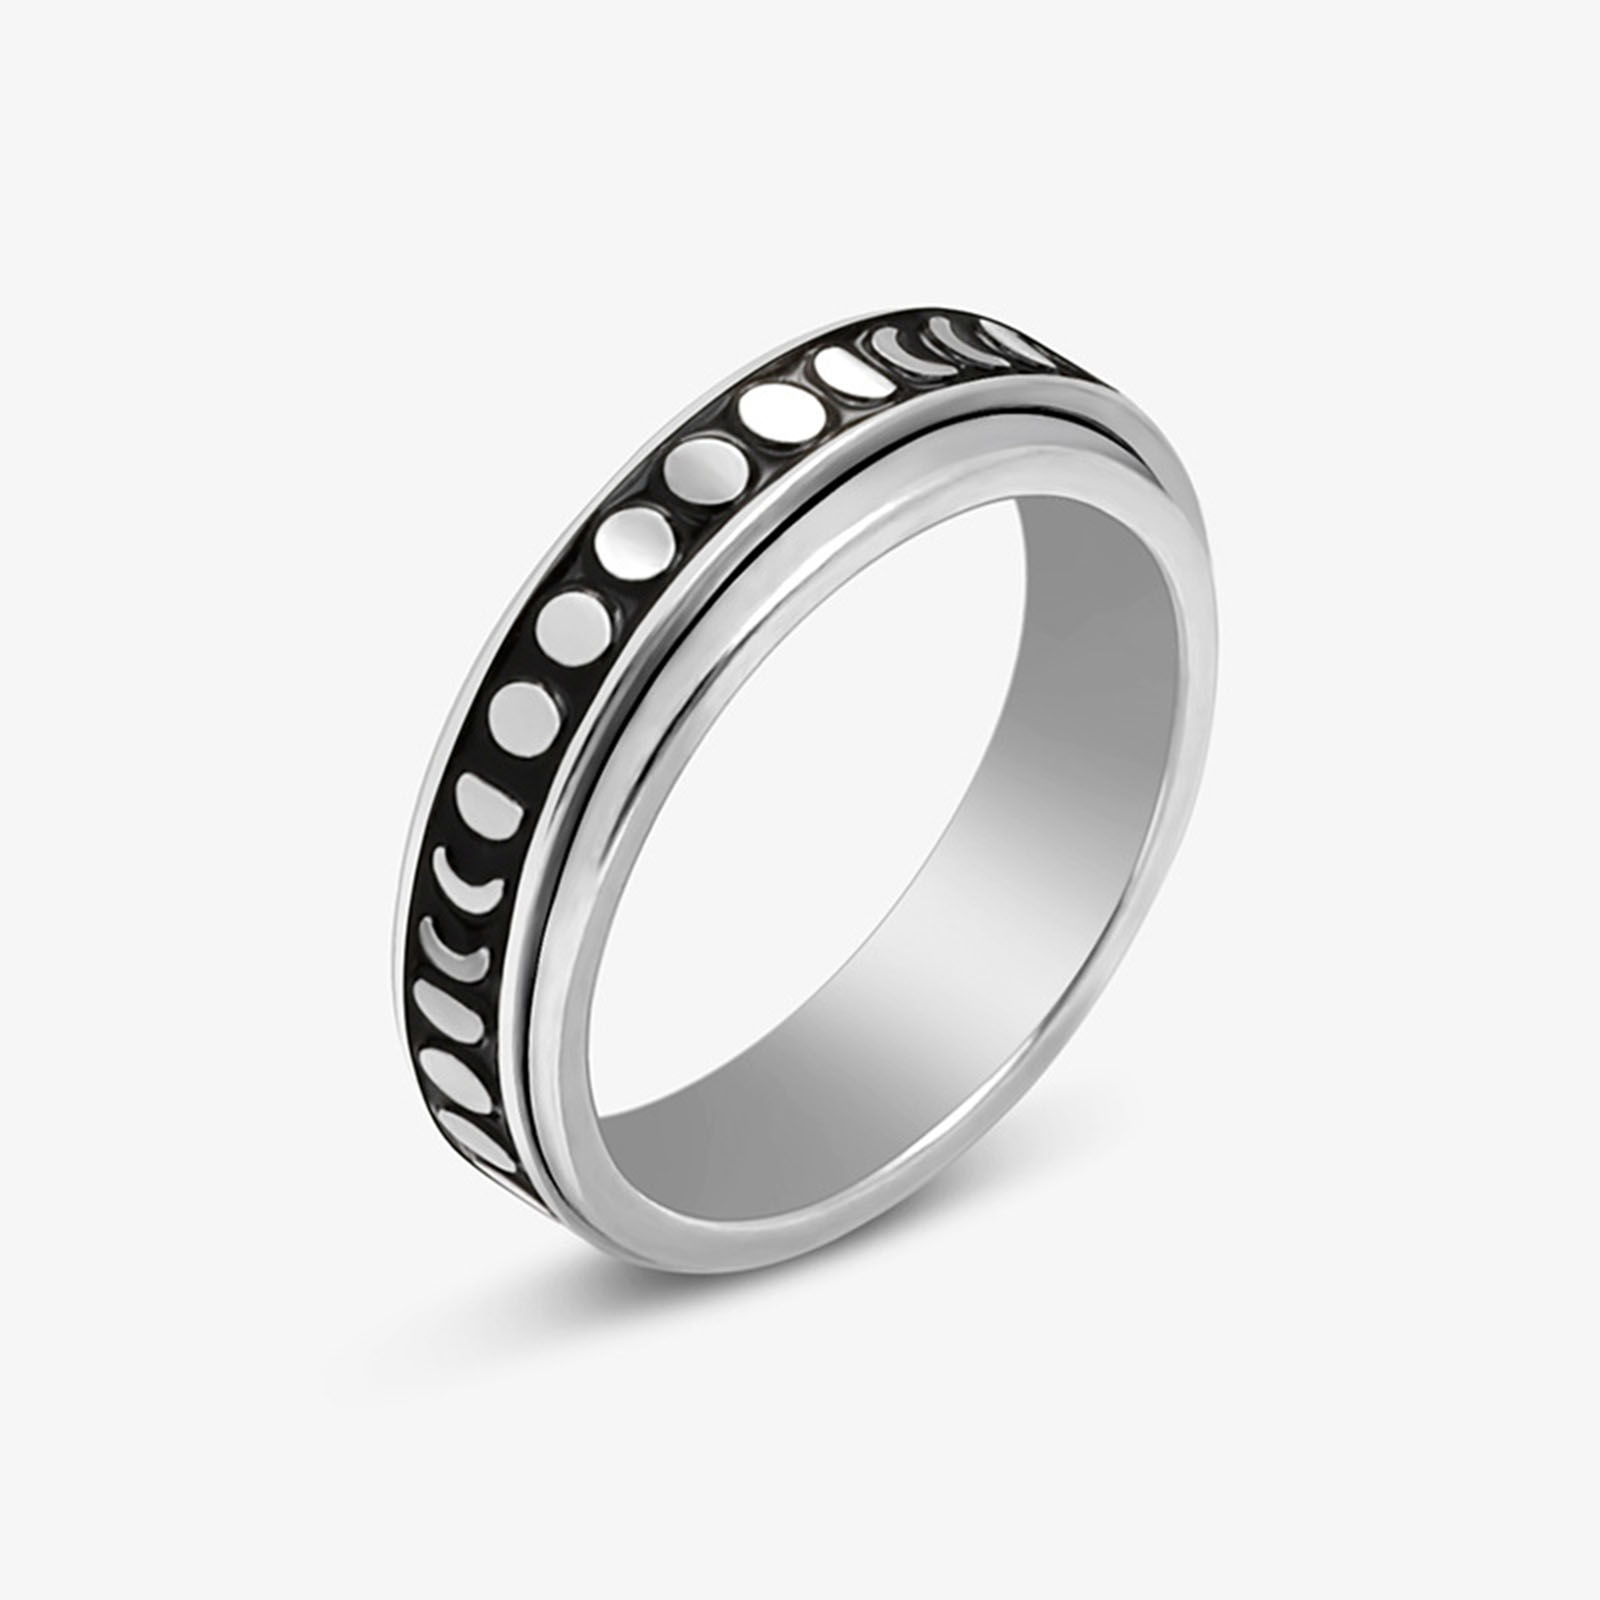 Picture of Stainless Steel Unadjustable Spinner Rings Fidget Ring Stress Relieving Anxiety Ring Silver Tone Black Rotatable Half Moon Enamel 19.8mm(US Size 10), 1 Piece